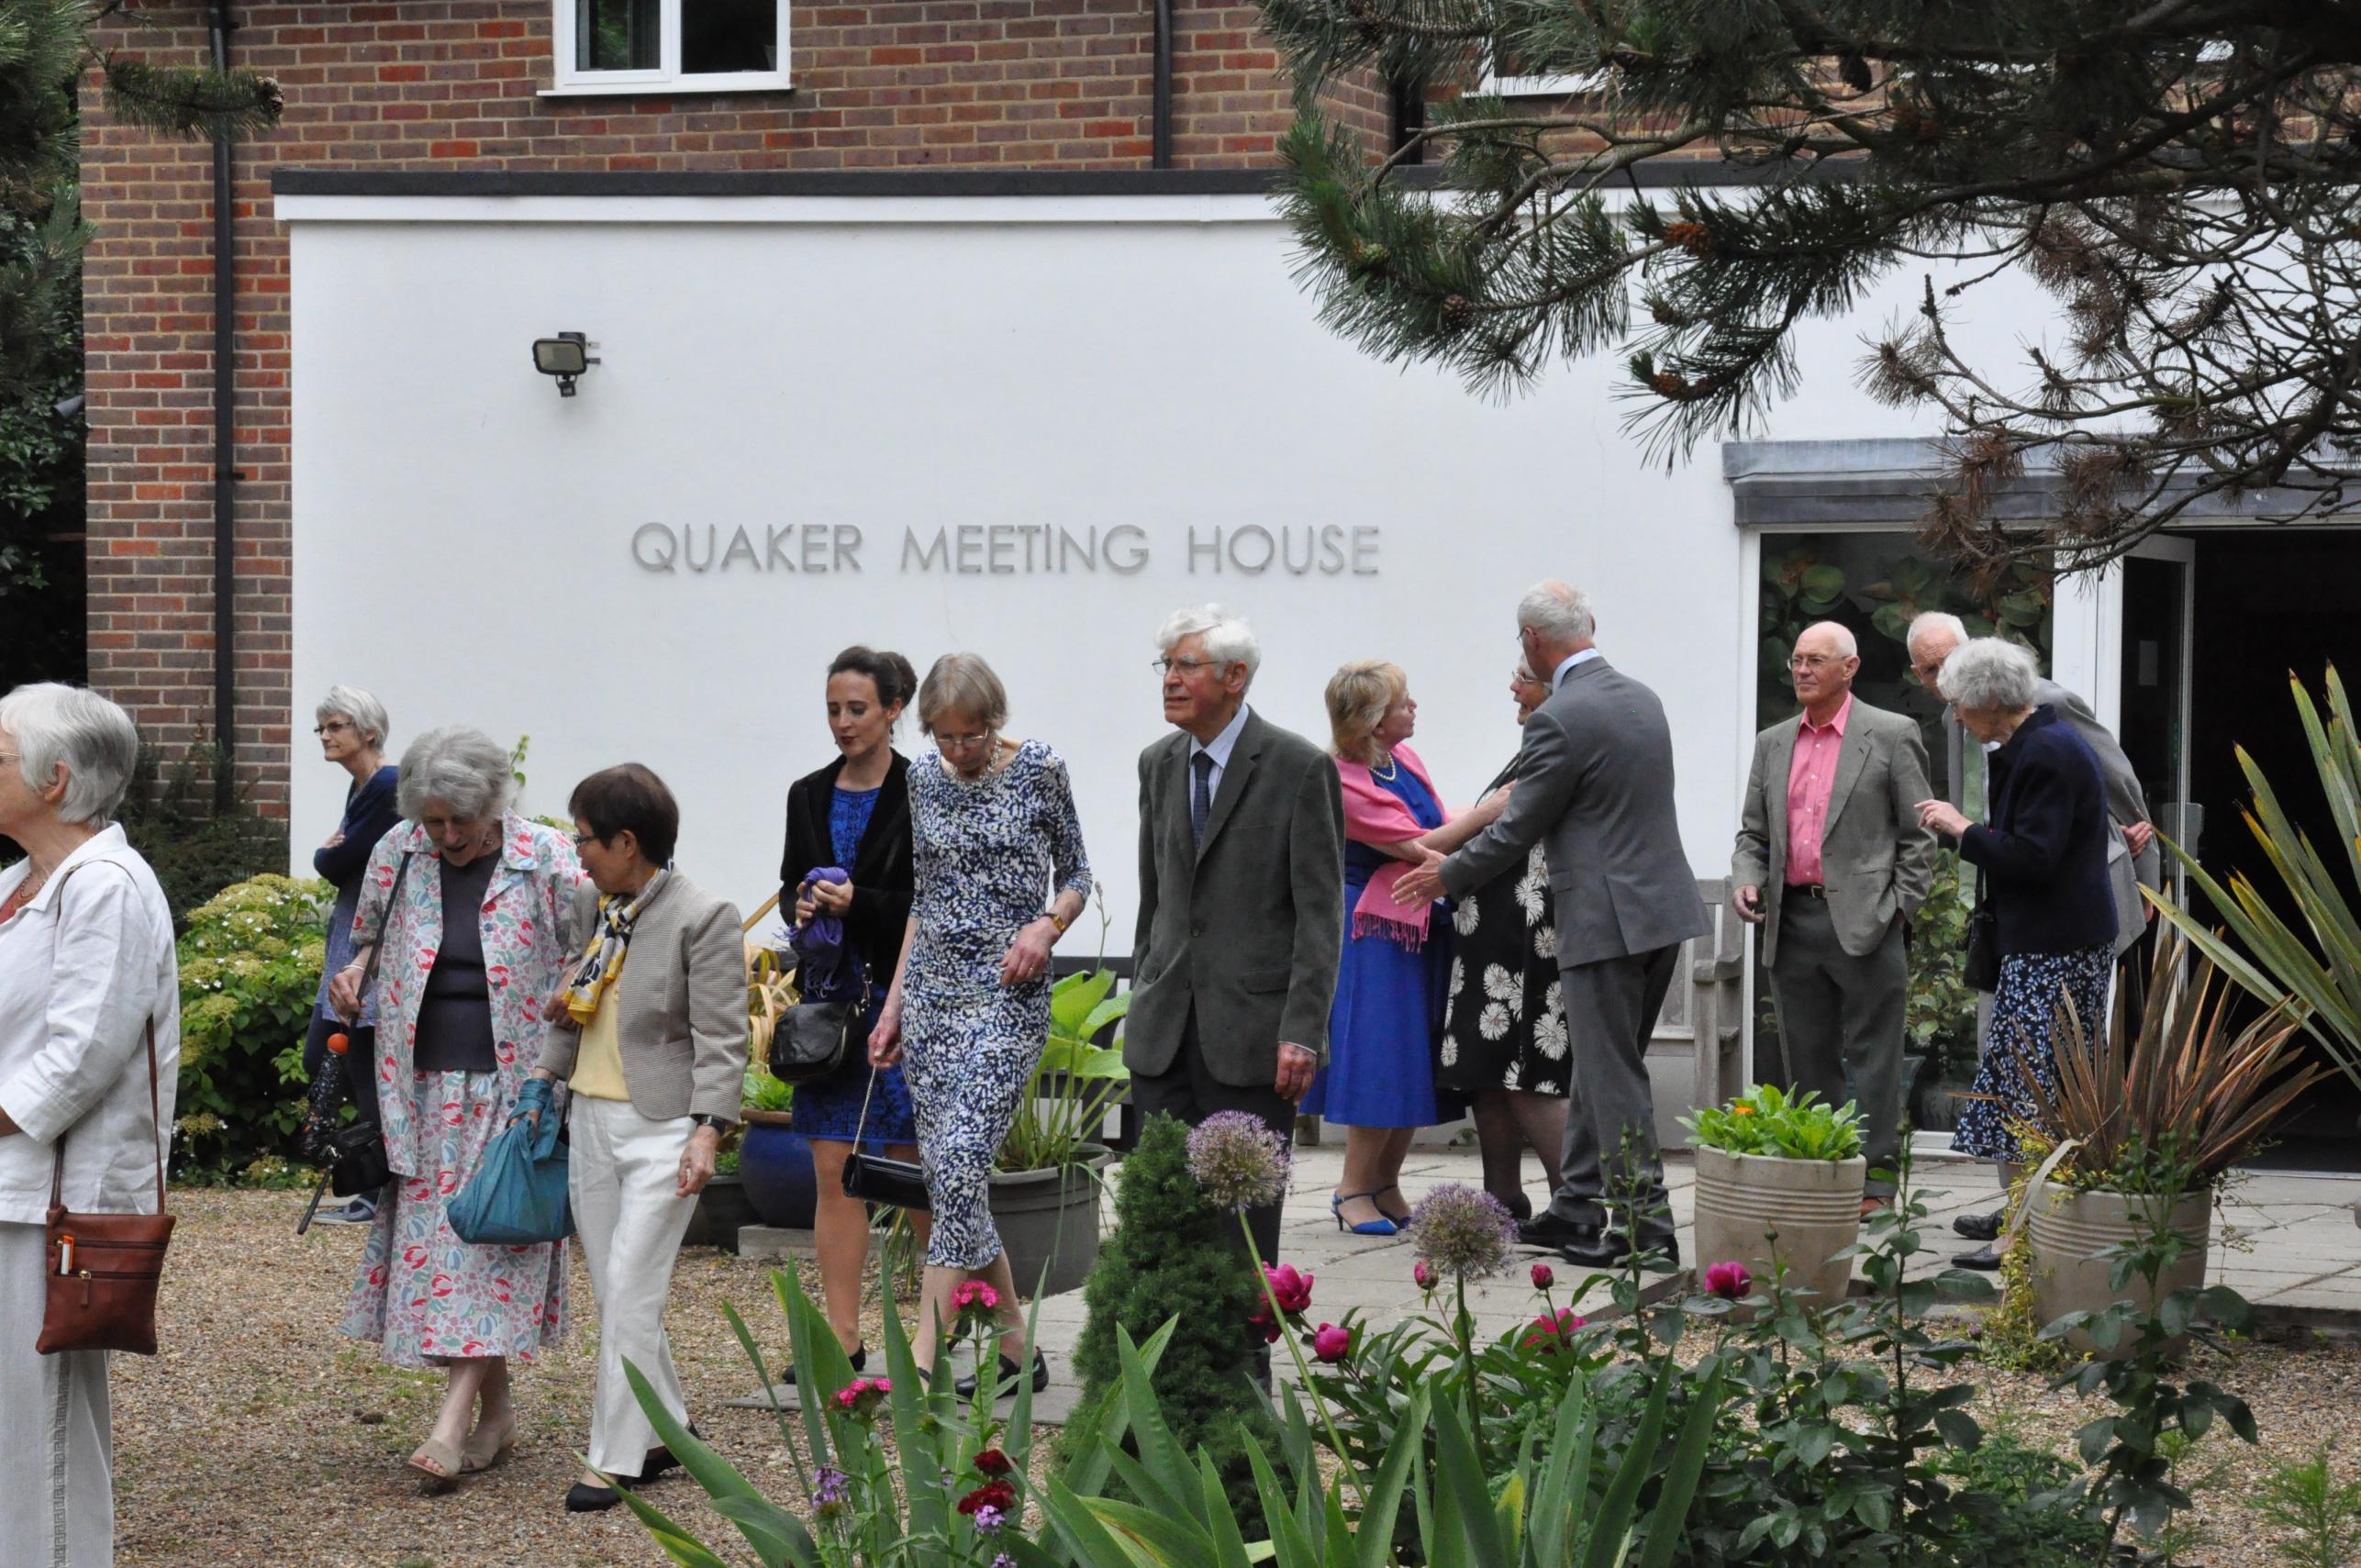 [Monday 5th June, After the Marriage outside the Watford Quaker Meeting House (Photo by Bedri).